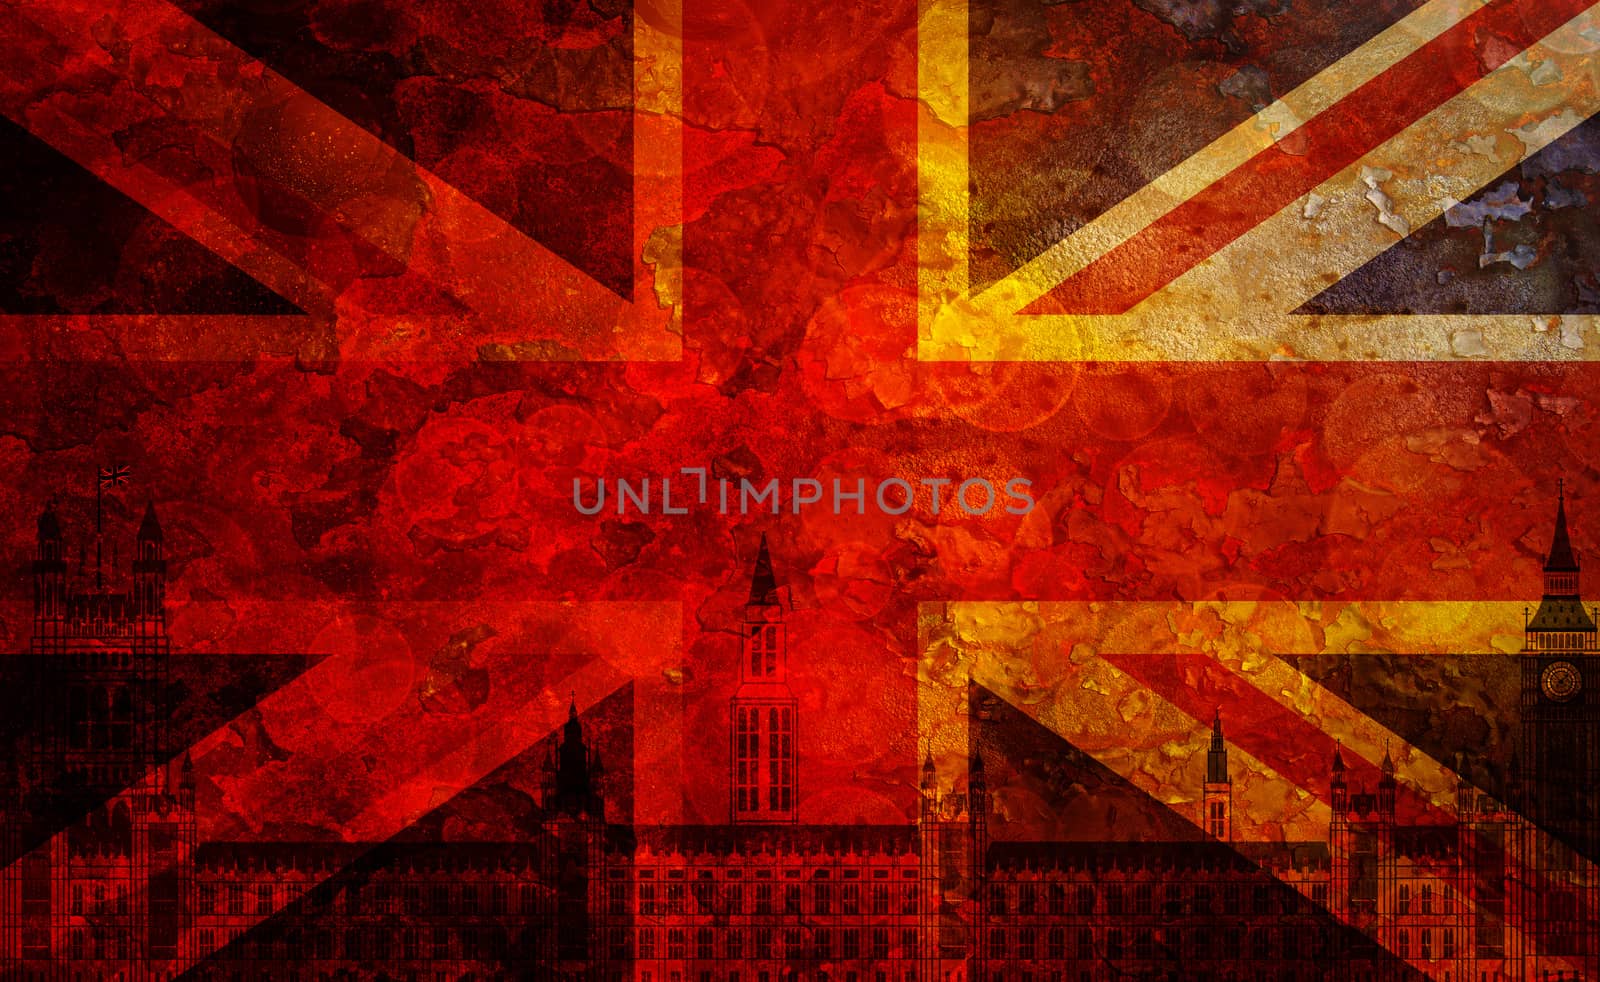 Westminster Palace Big Ben Union Jack Great Britain Flag with Grunge Texture Background Illustration